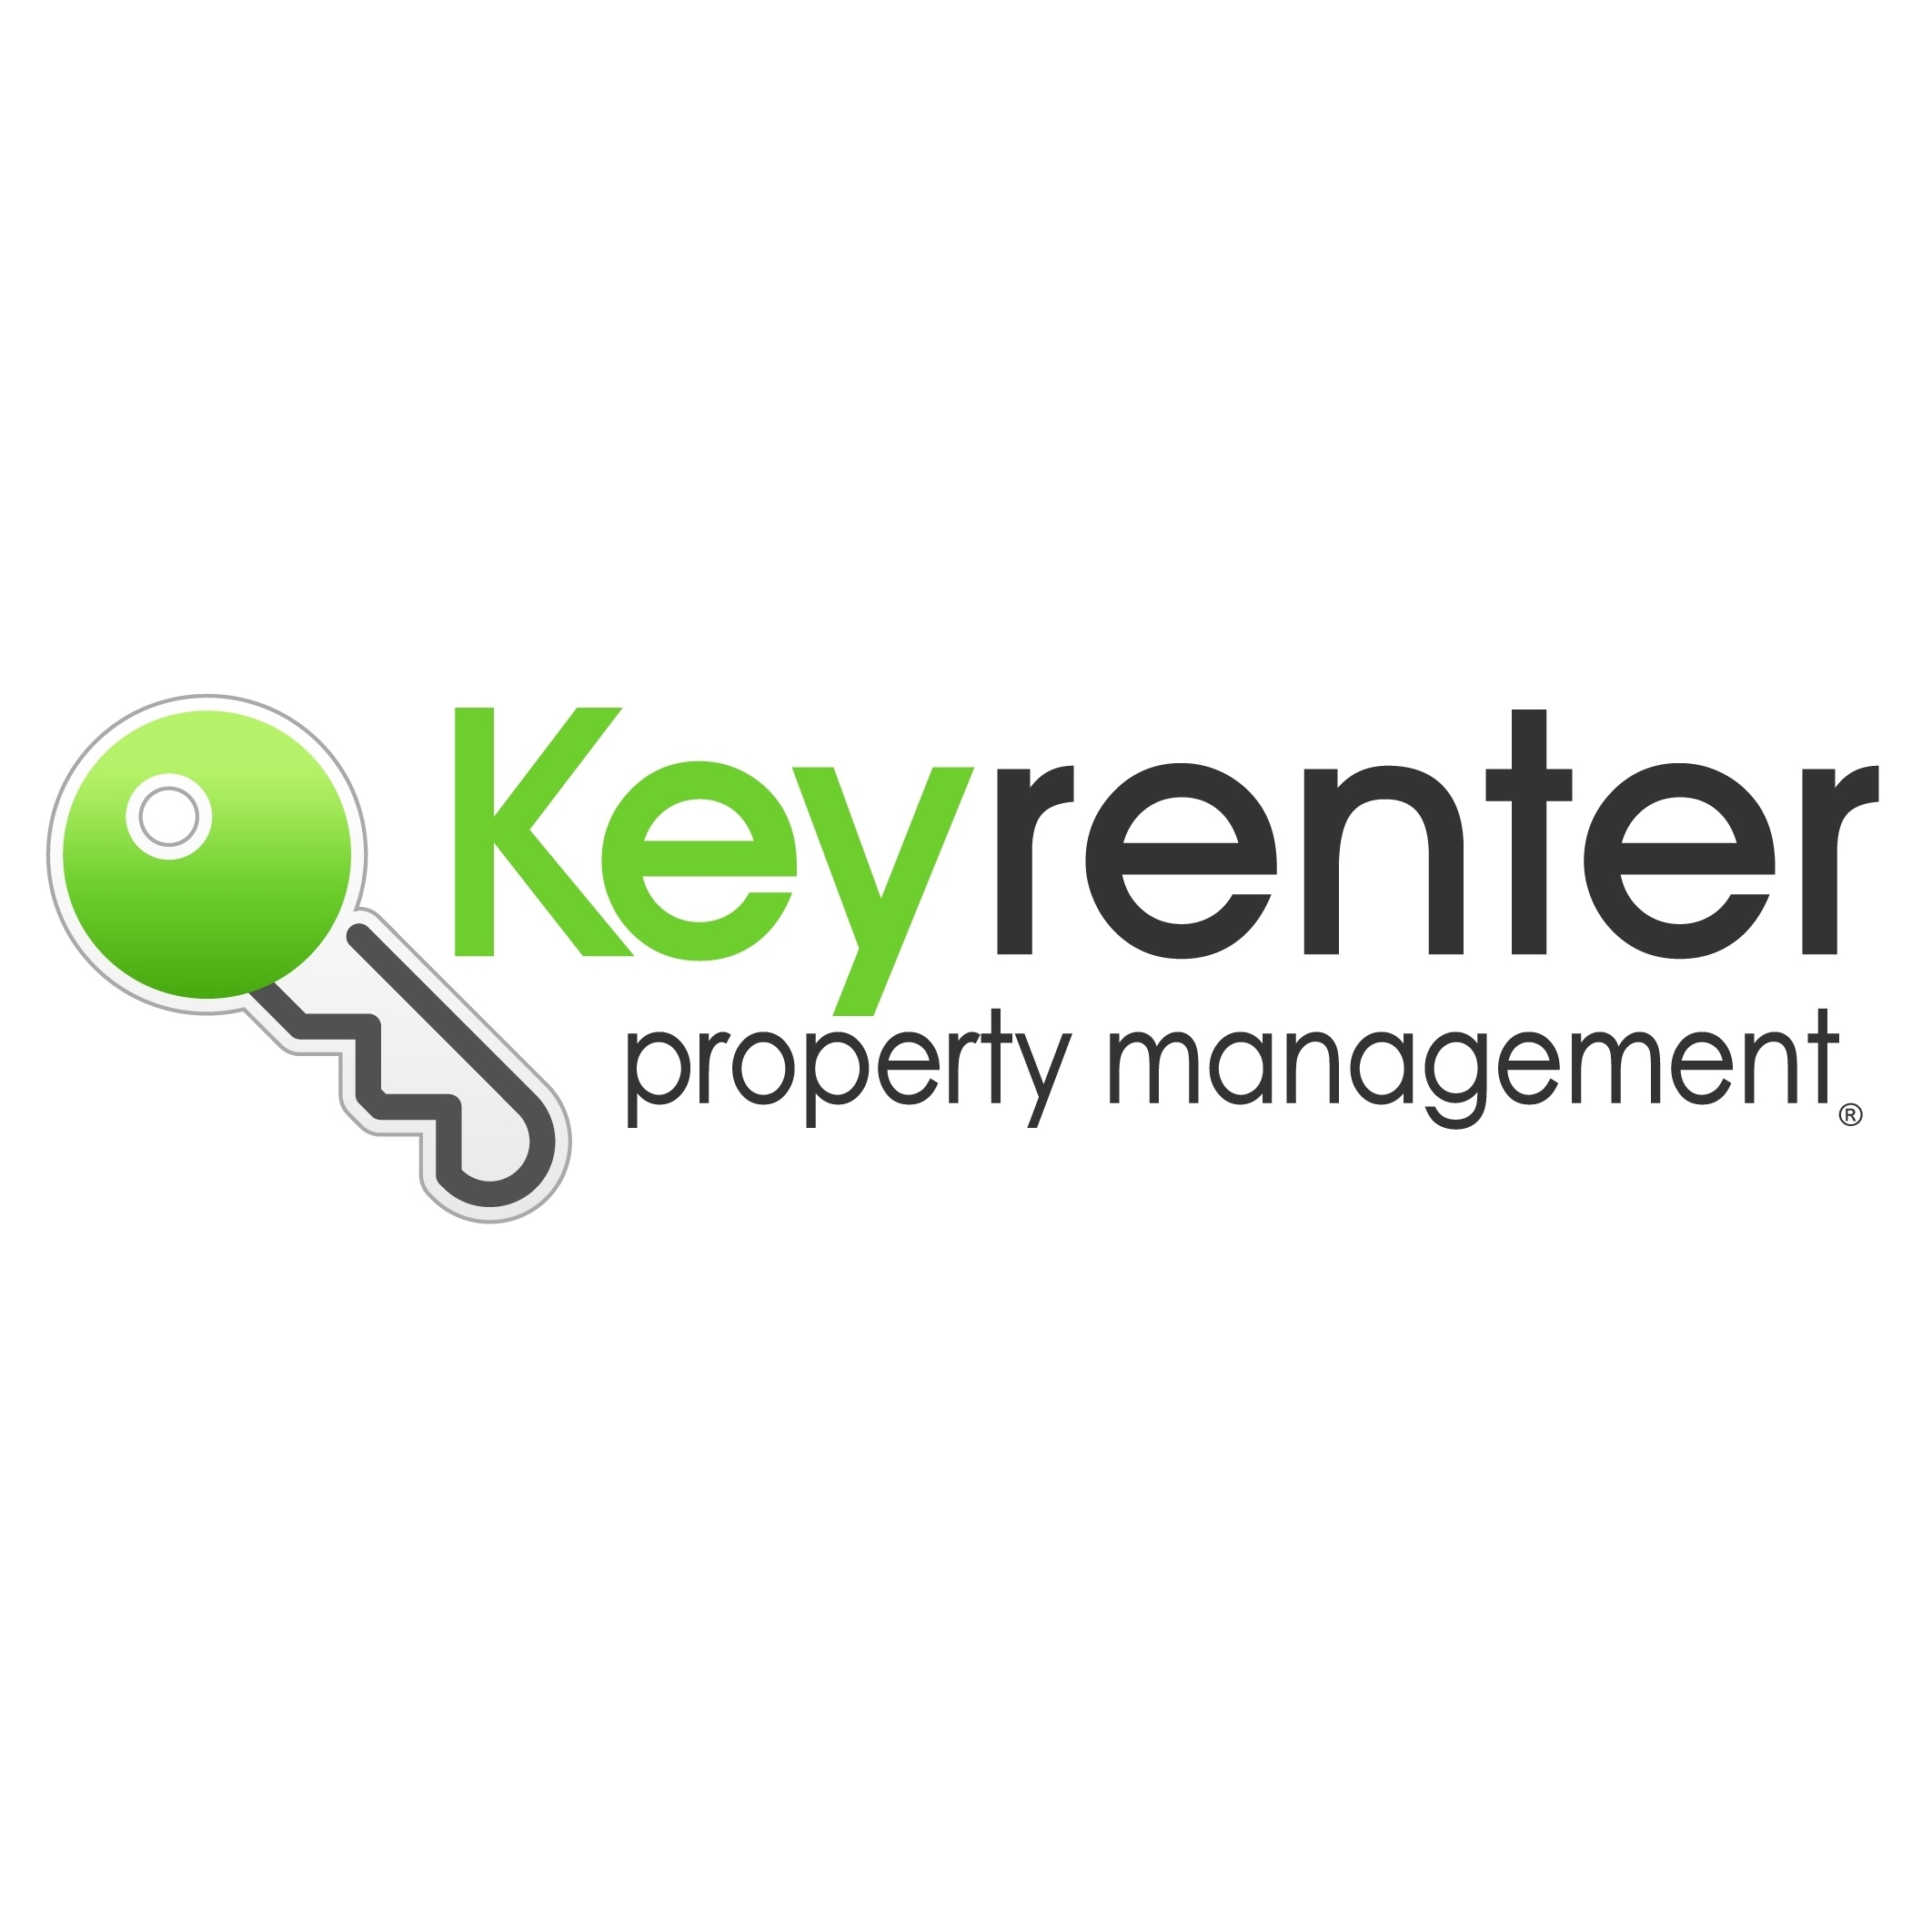 Keyrenter Property Management Silicon Valley Photo